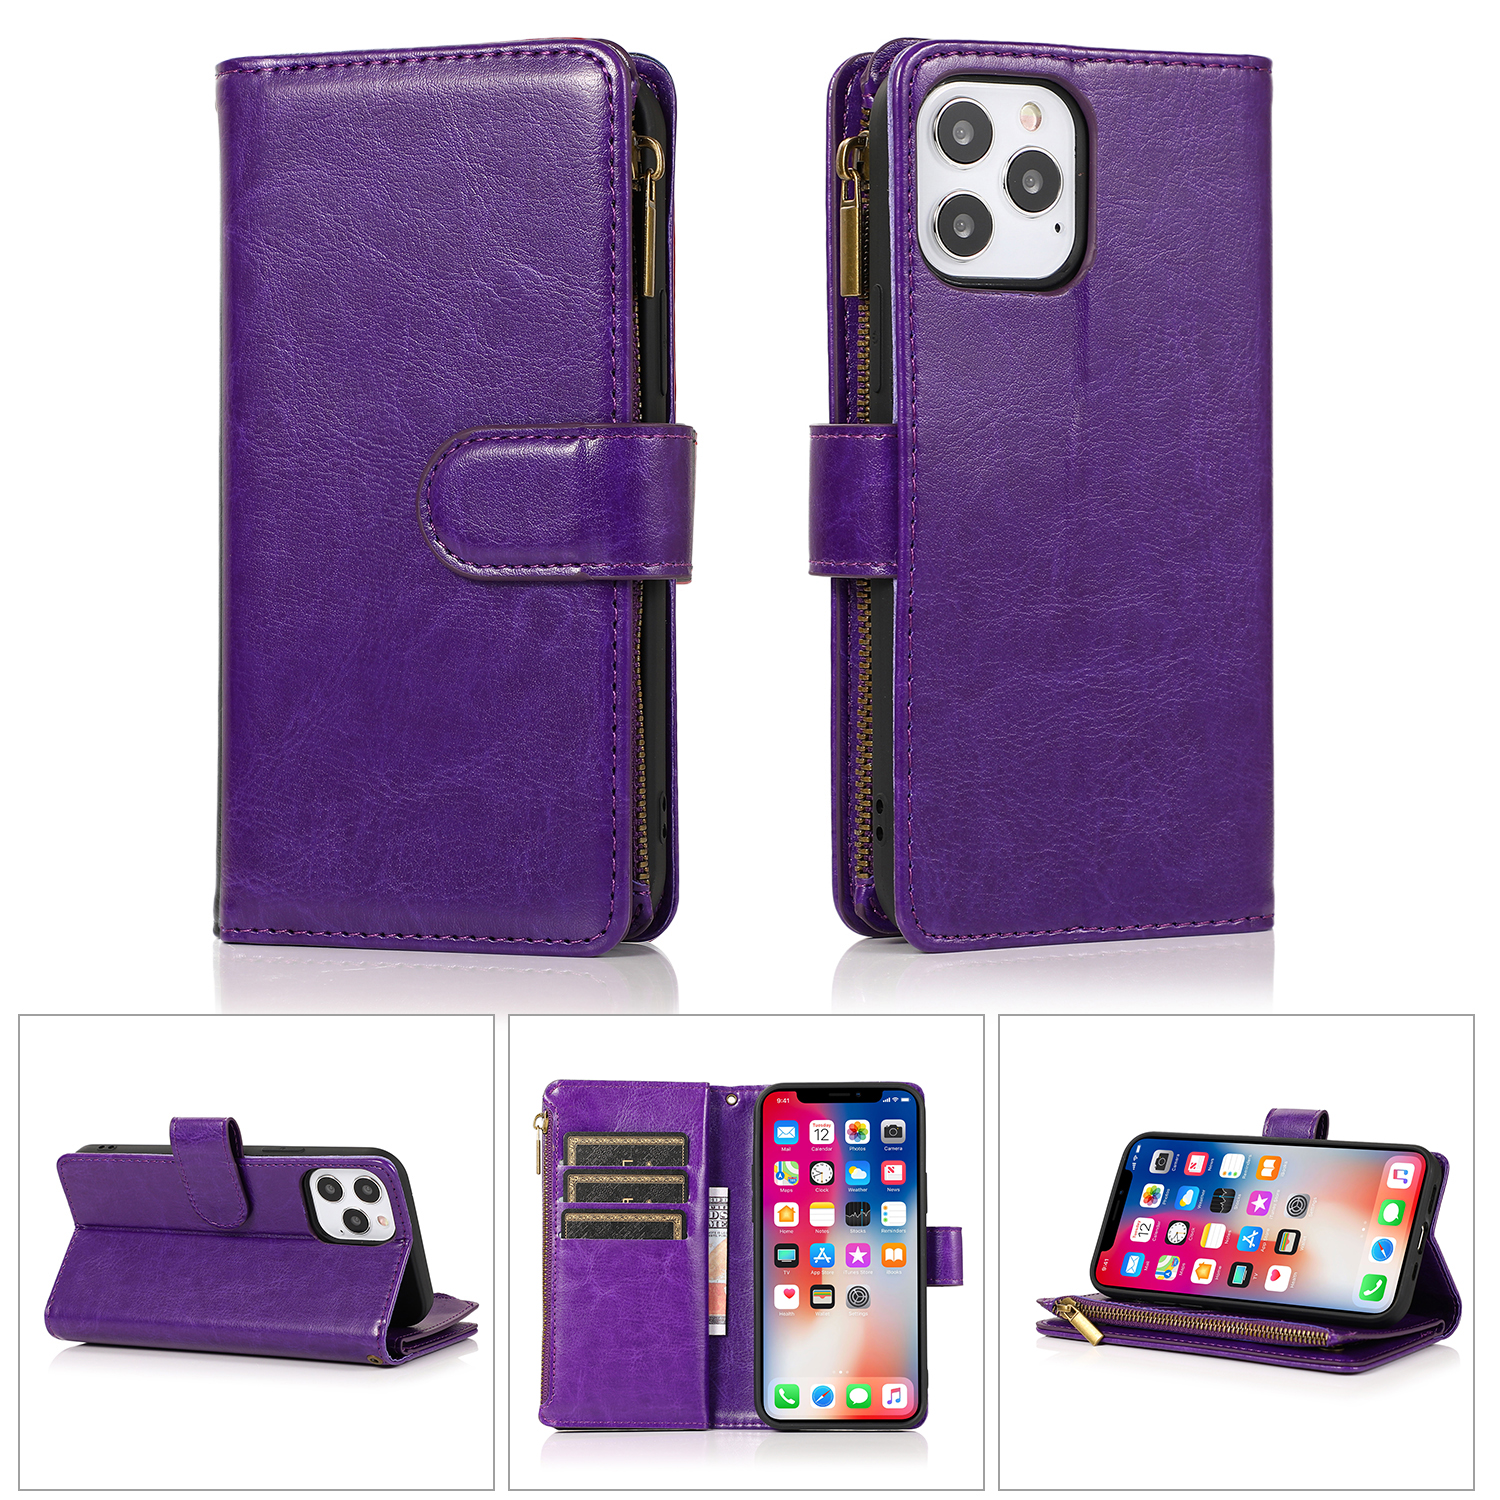 for Samsung Galaxy S21 Ultra (6.8") Leather Zipper Wallet Case 9 Credit Card Slots Cash Money Pocket Clutch Pouch Stand & Strap Cover ,Xpm Phone Case [Purple] - image 1 of 8